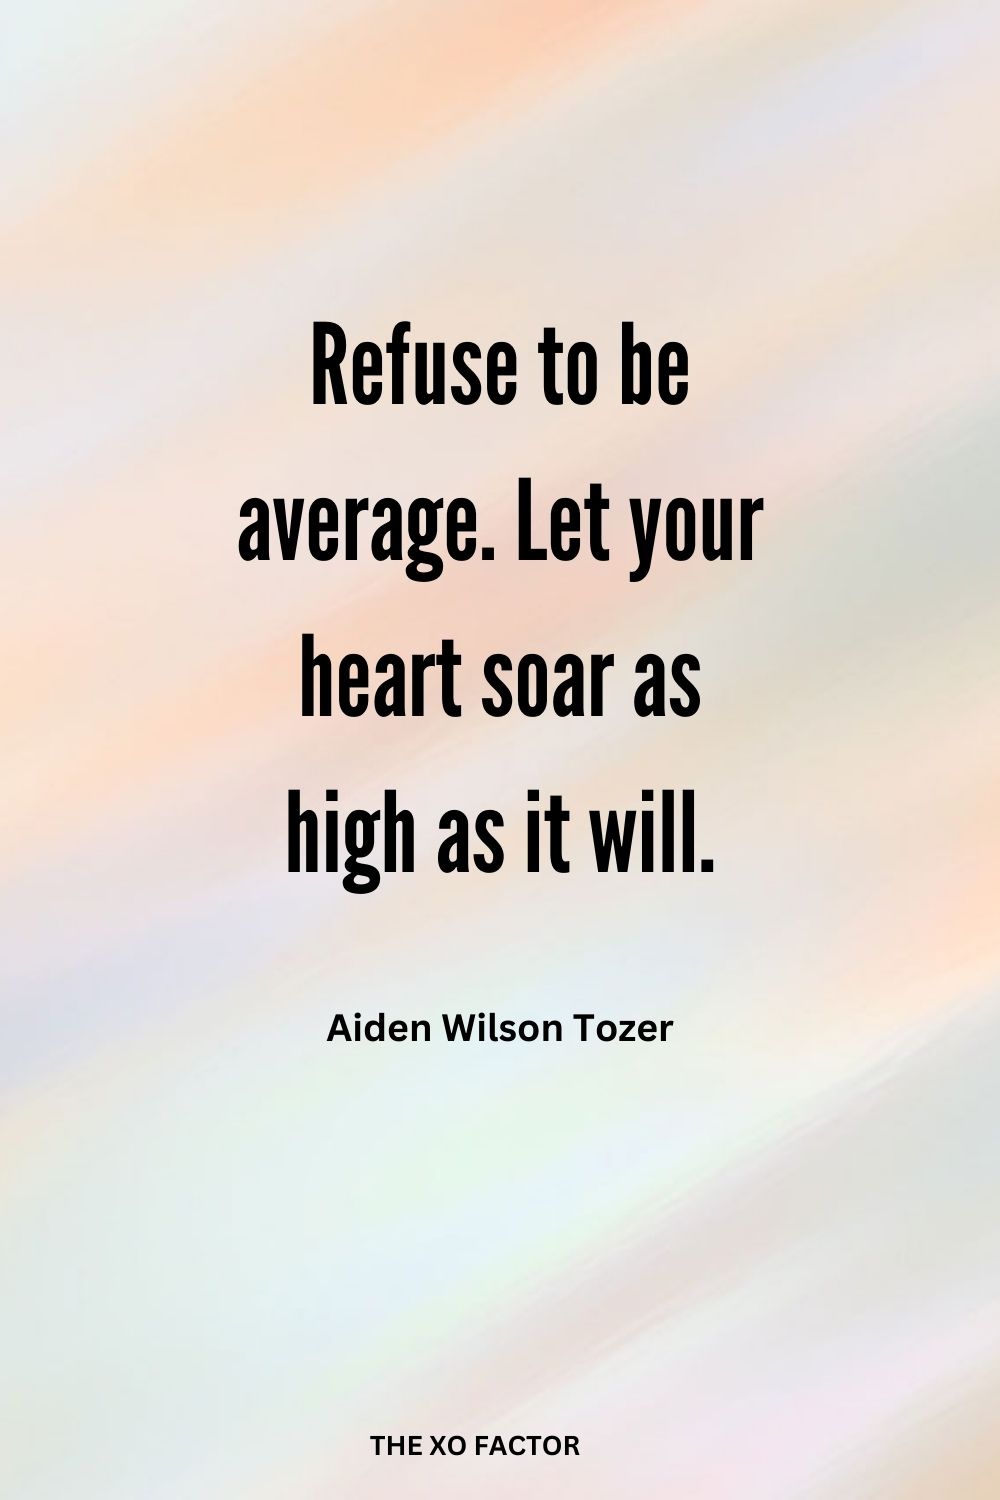 Refuse to be average. Let your heart soar as high as it will.
Aiden Wilson Tozer